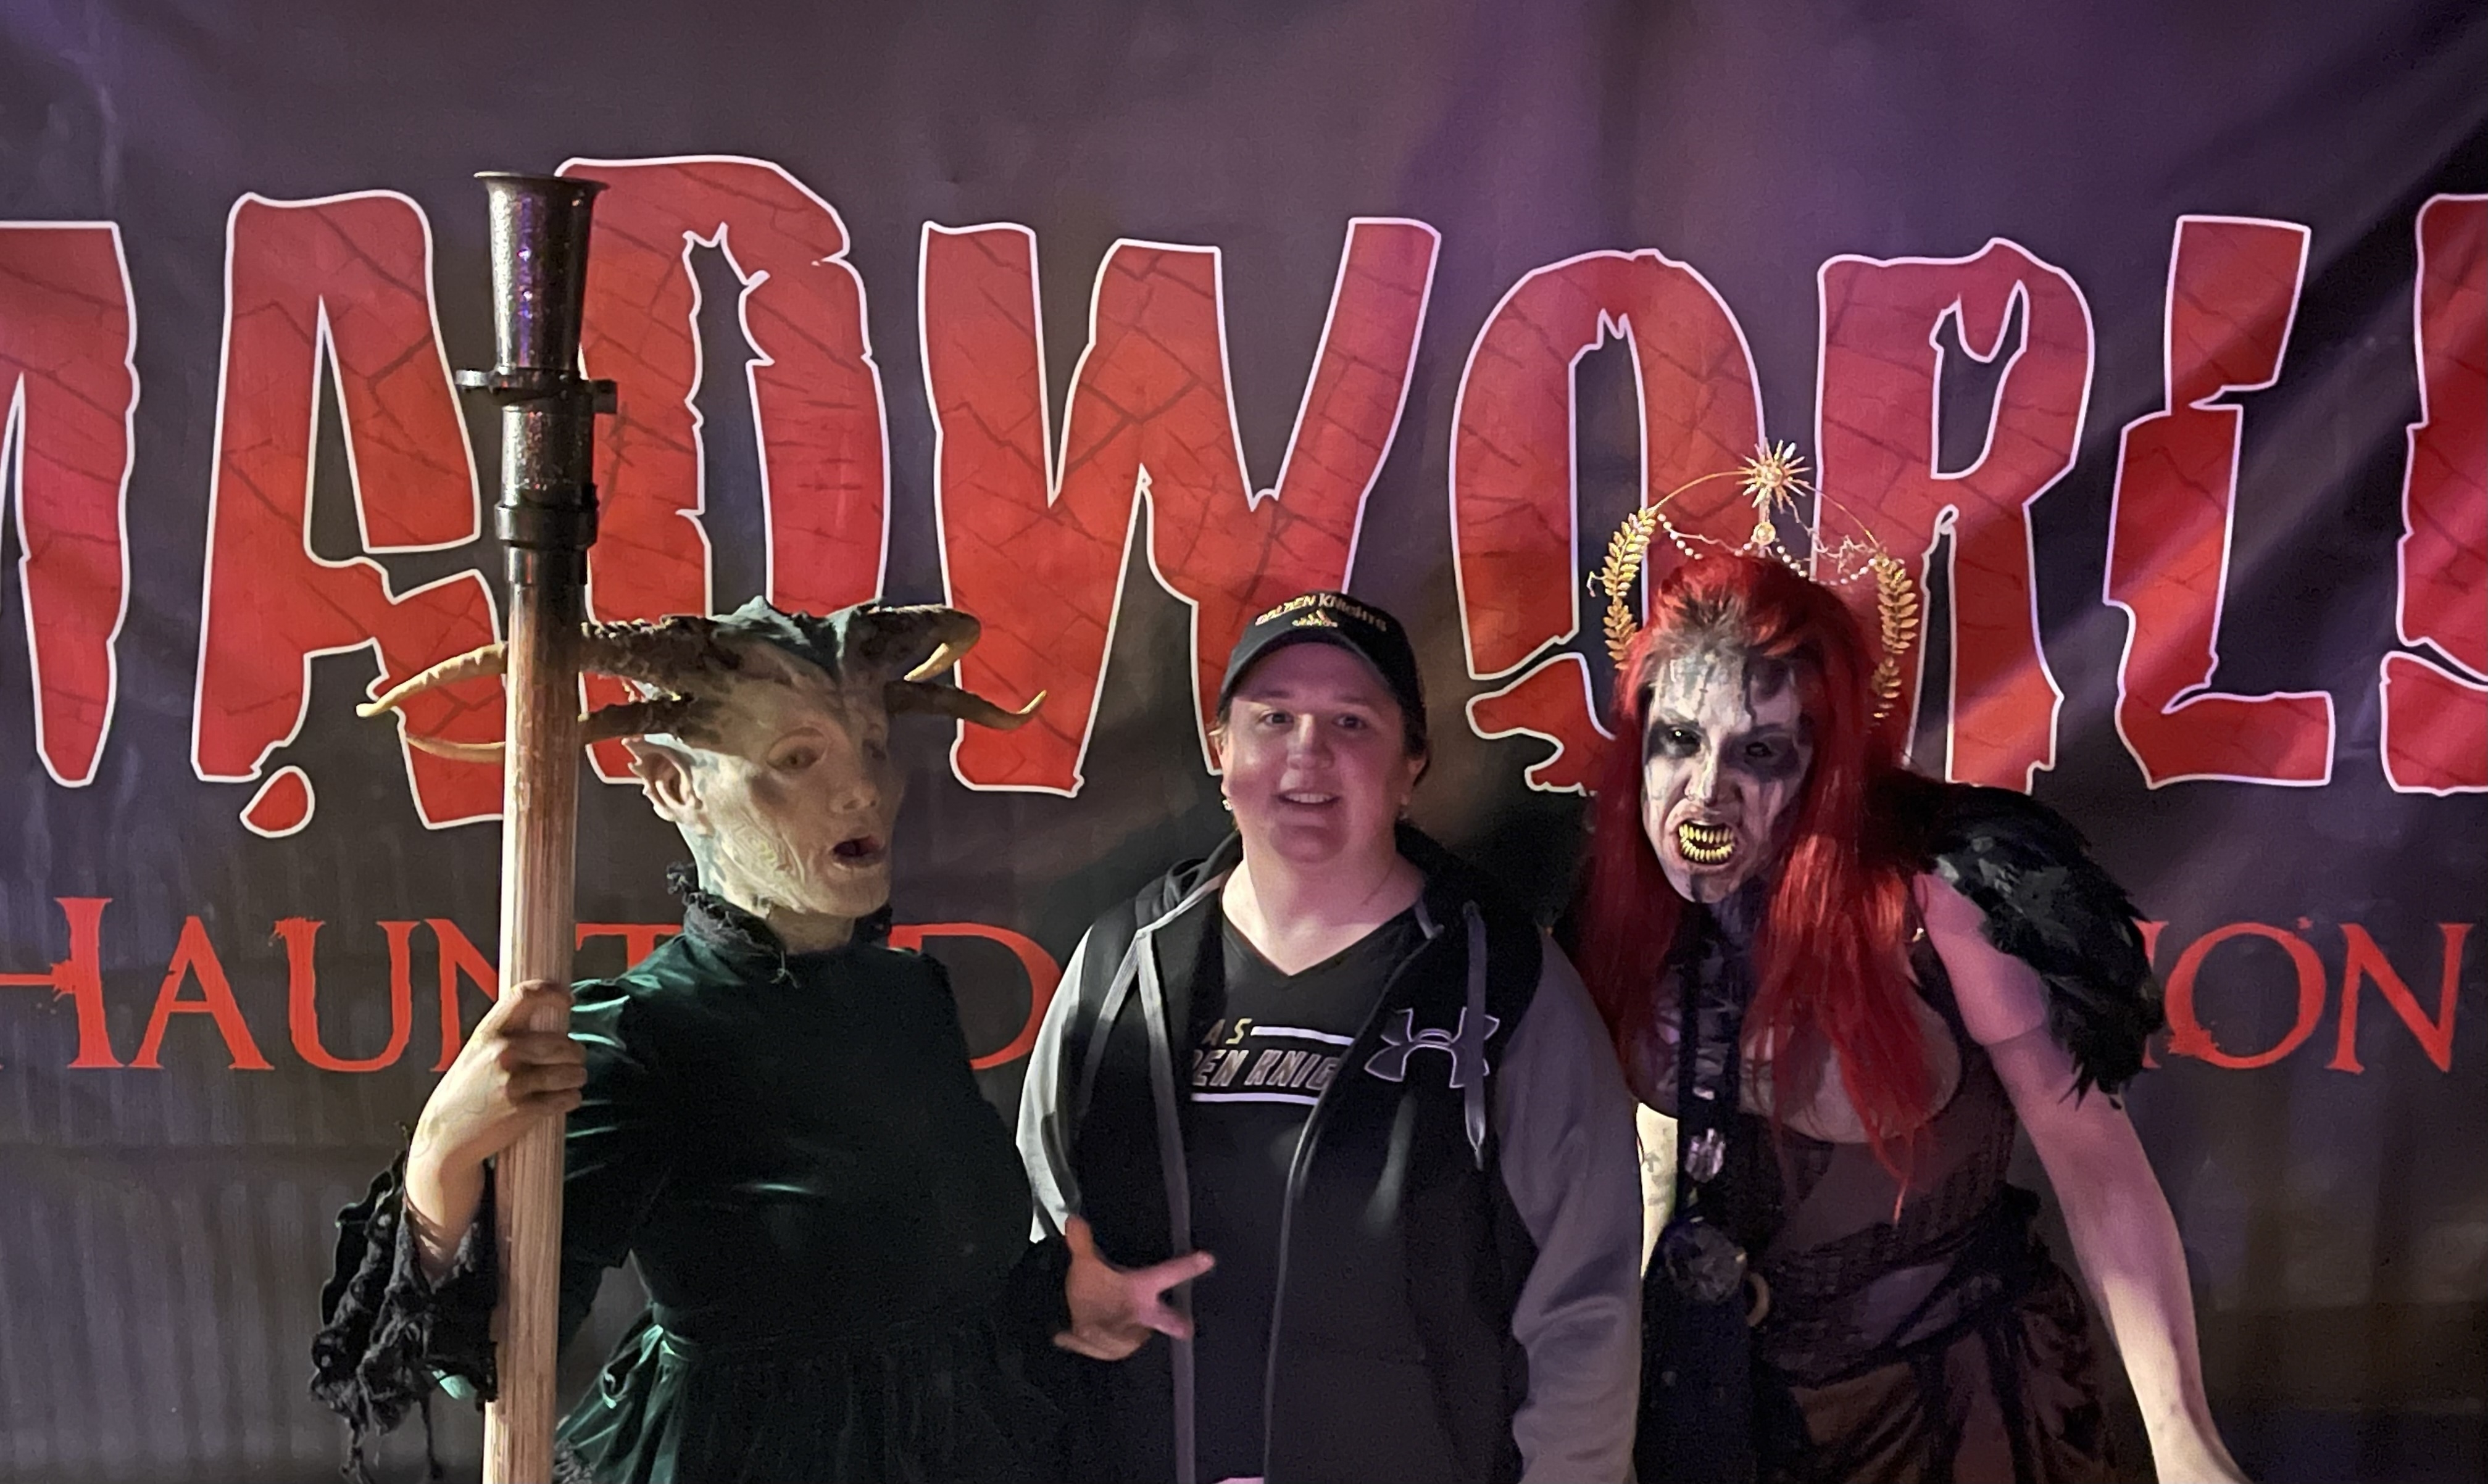 Madworld Haunted Attraction - All You Need to Know BEFORE You Go (with  Photos)